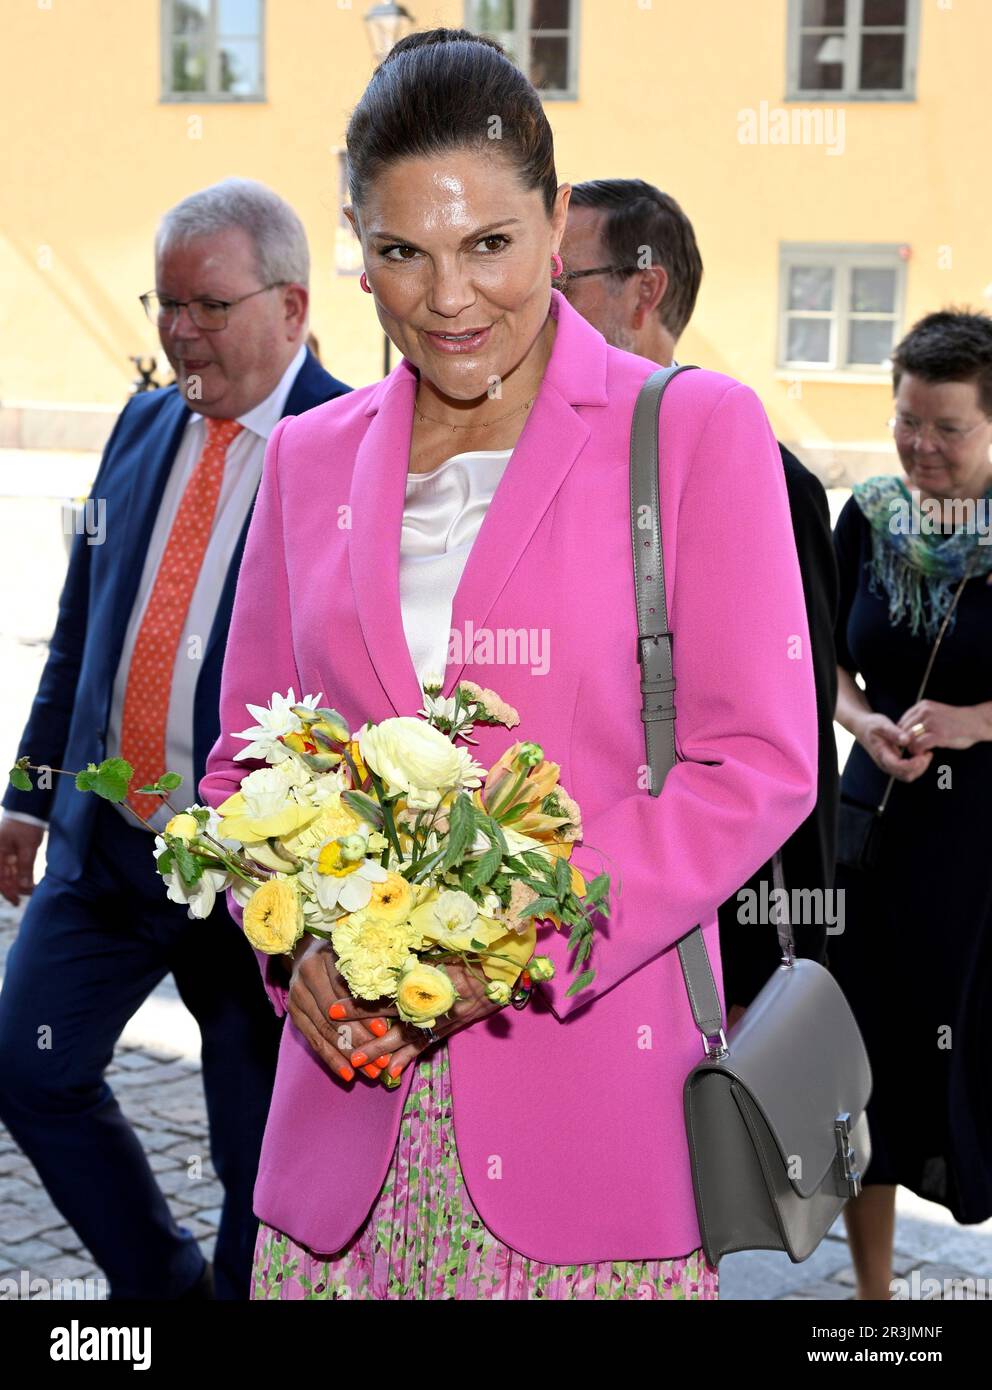 Crown Princess Victoria and Prince Daniel arrive at Rudbeckianska gymnasiet for the school's 400th anniversary celebrations in Vasteras, Sweden, May 2 Stock Photo